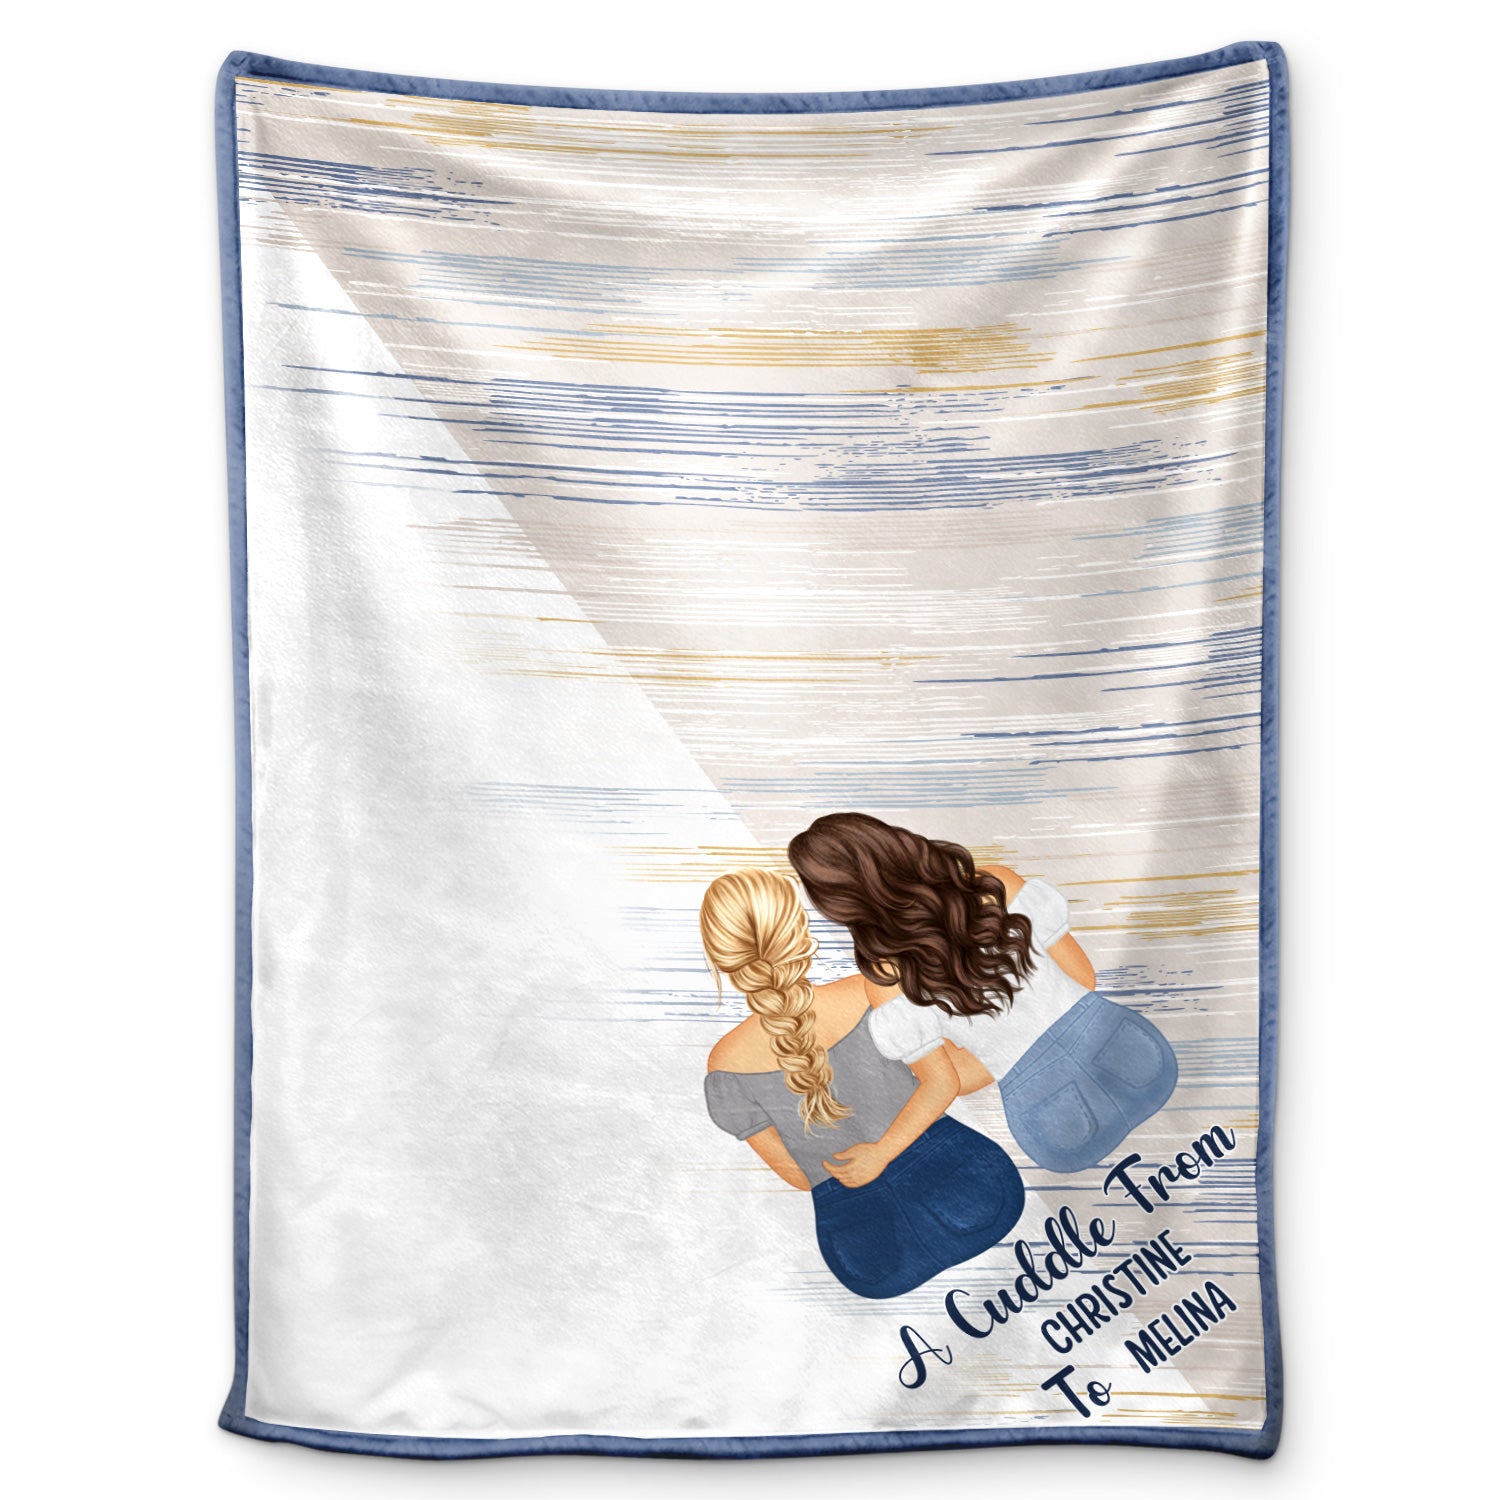 A Cuddle From - Gift For Sisters And Best Friends - Personalized Fleece Blanket